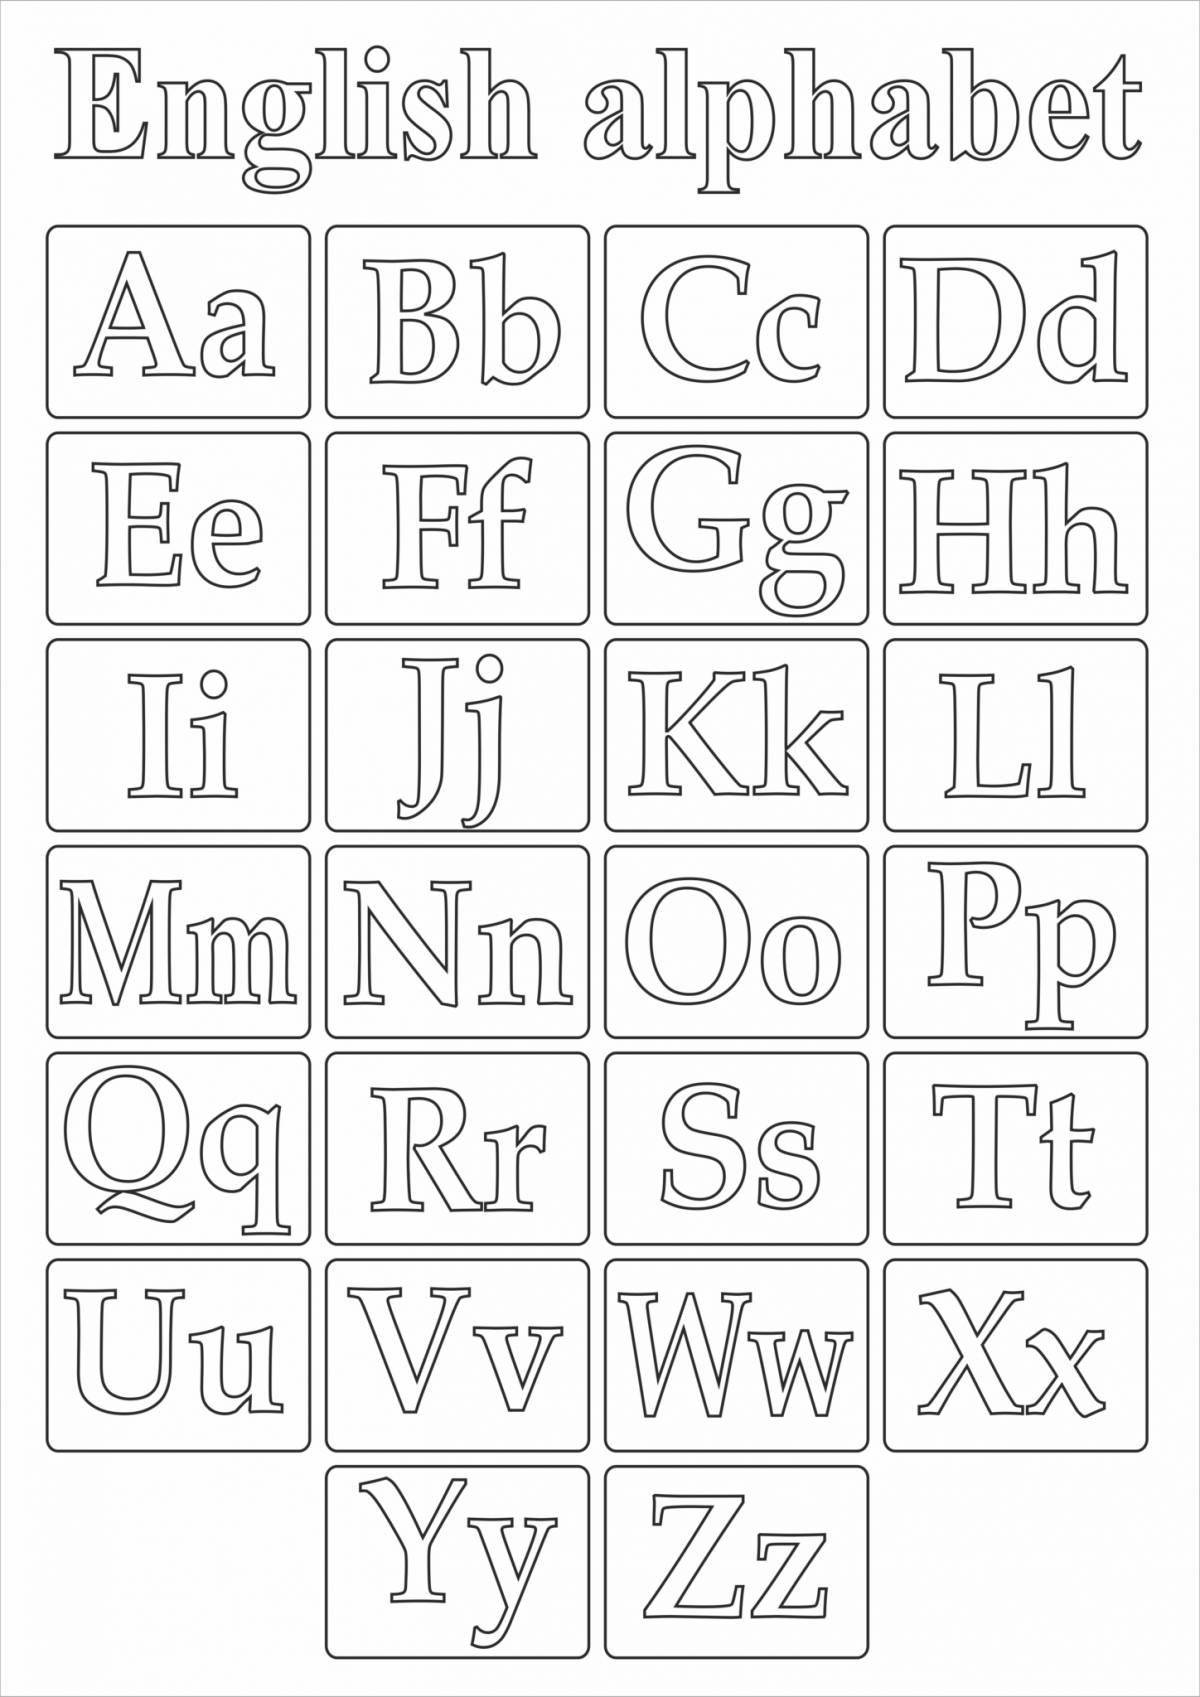 Coloring English alphabet for 2nd grade